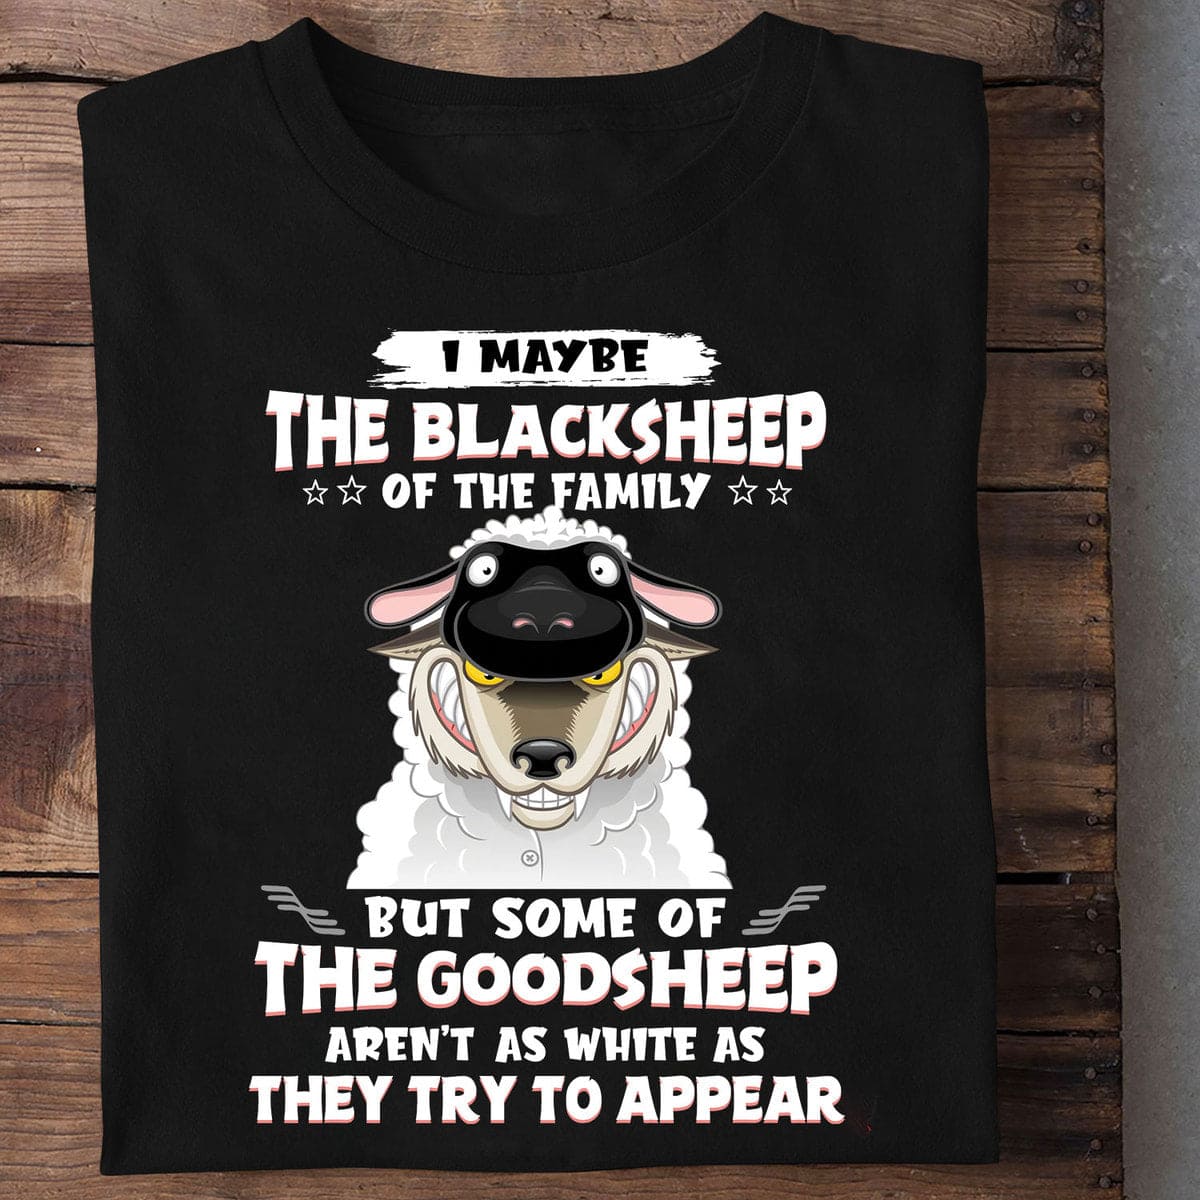 Wolf Sheep - I maybe the blacksheep if the family but some of the goodsheep aren't as white as they try to appear